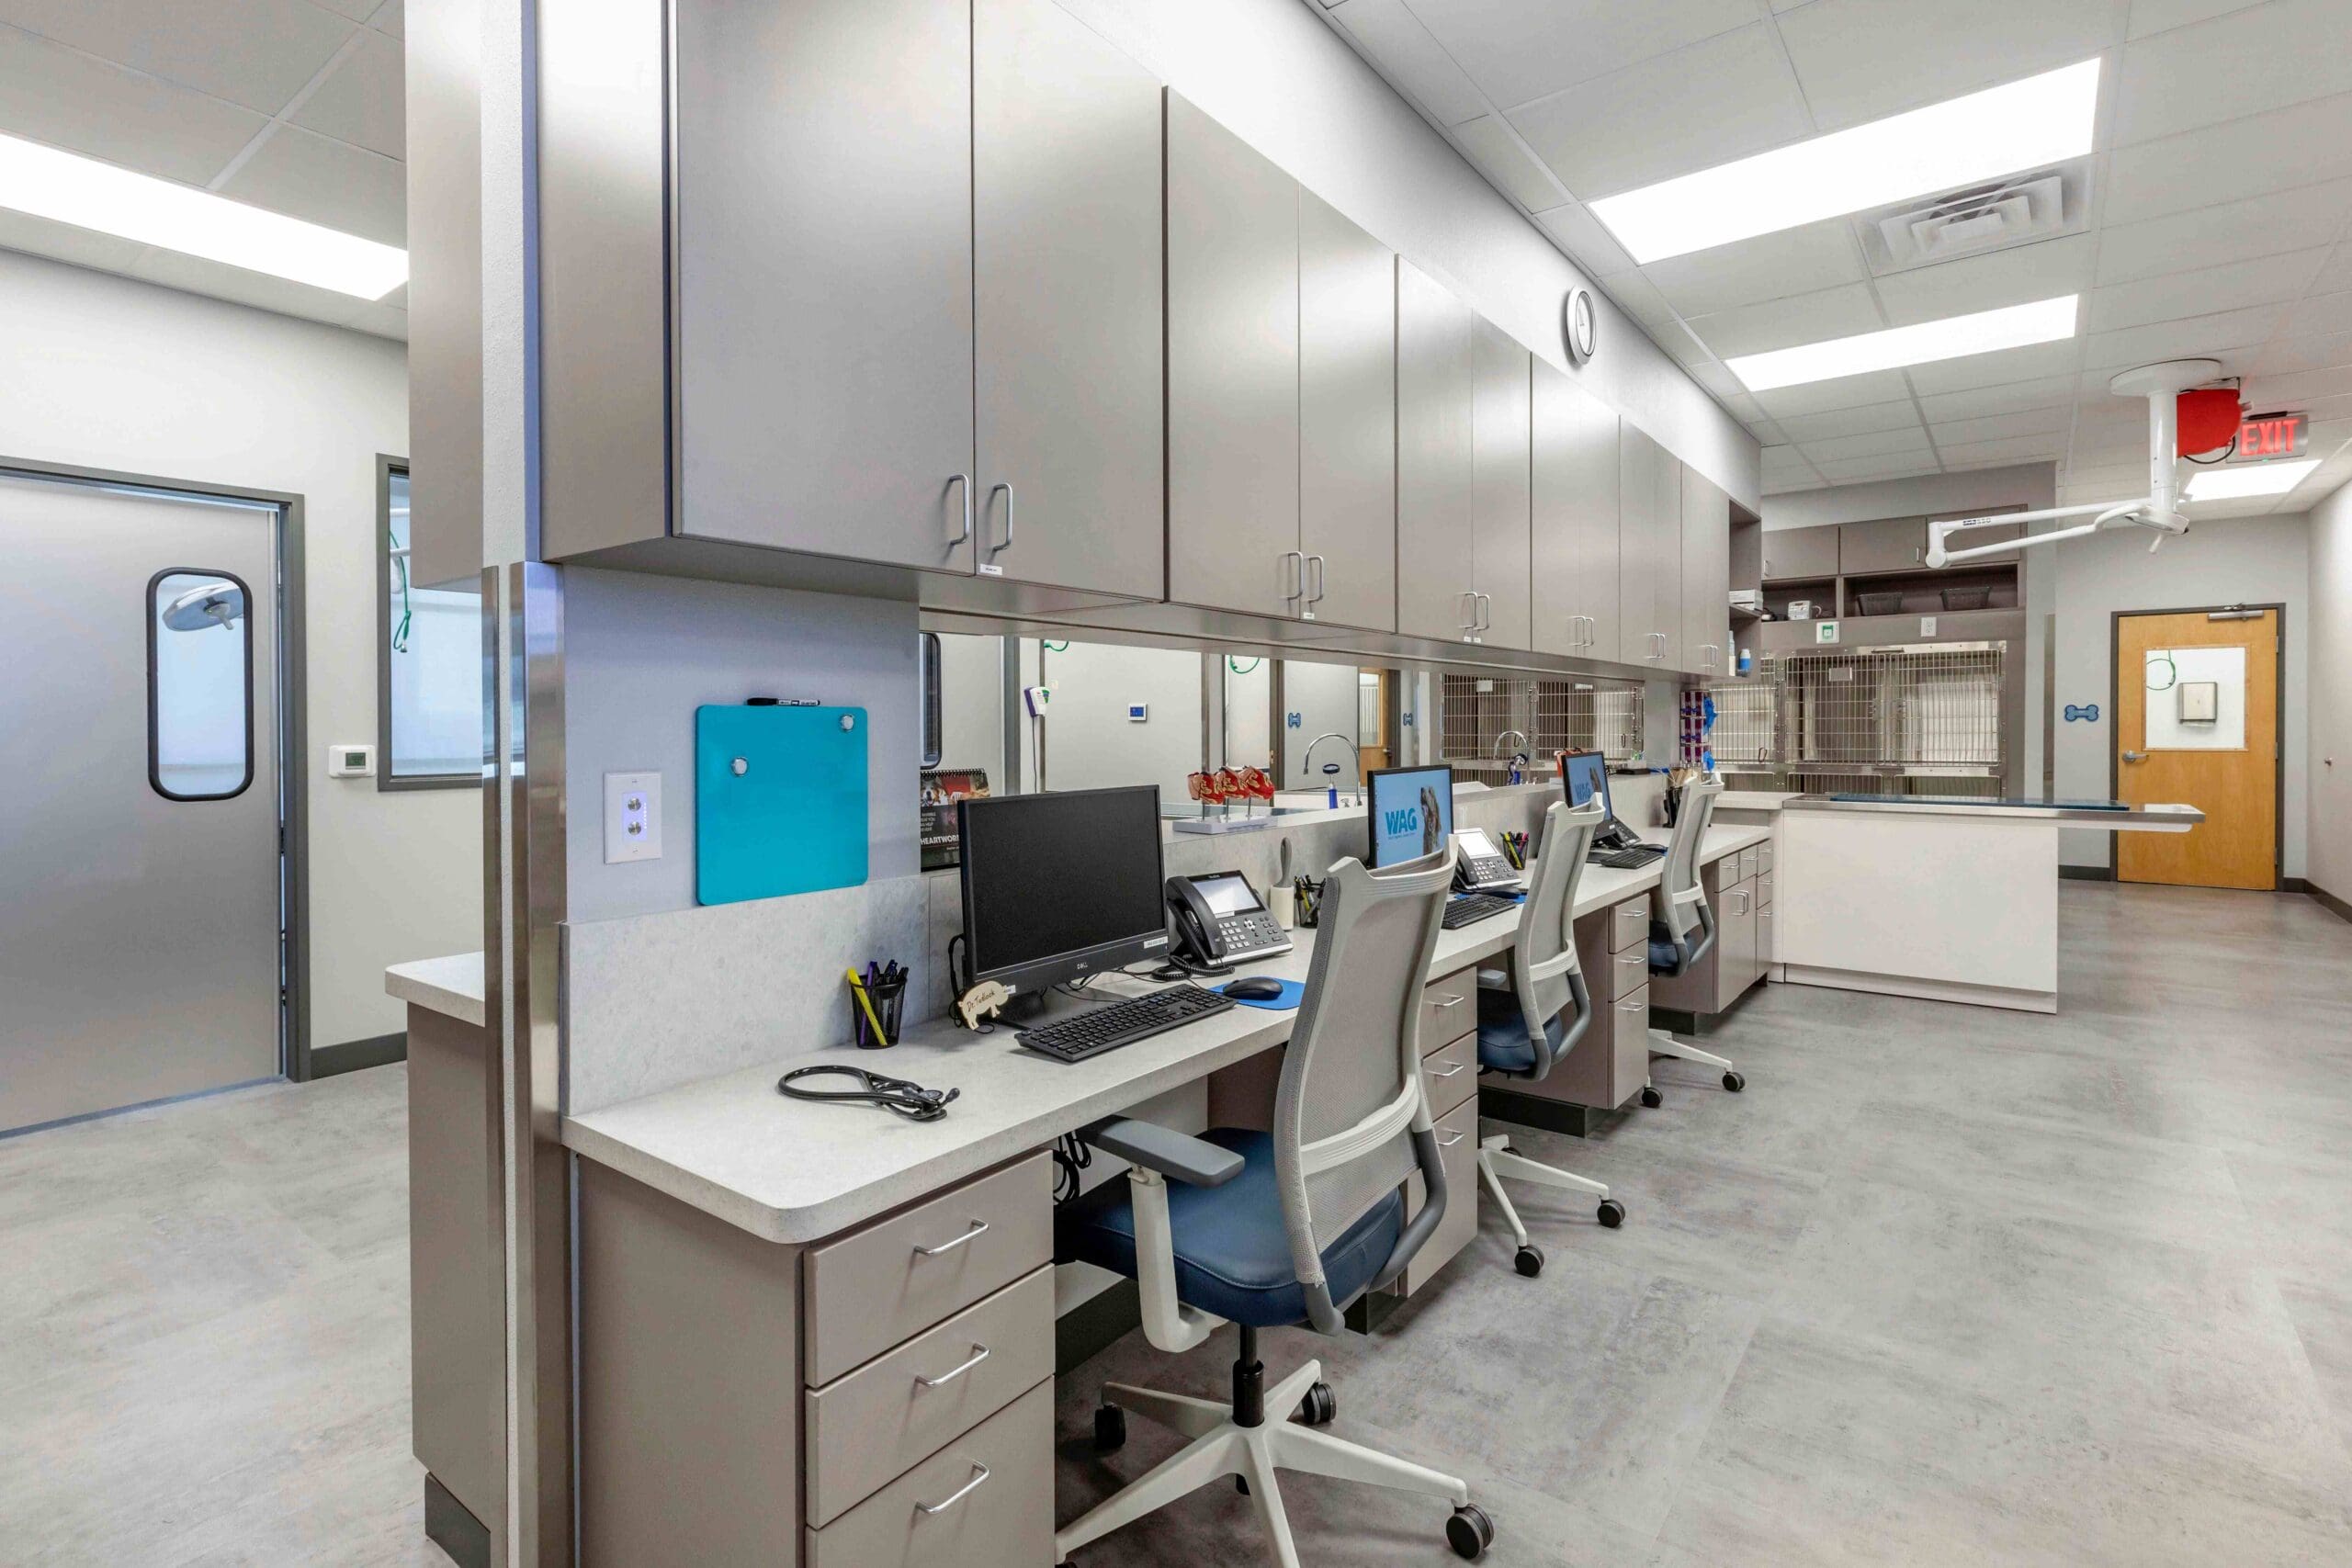 Open space by exam rooms for technicians to log work